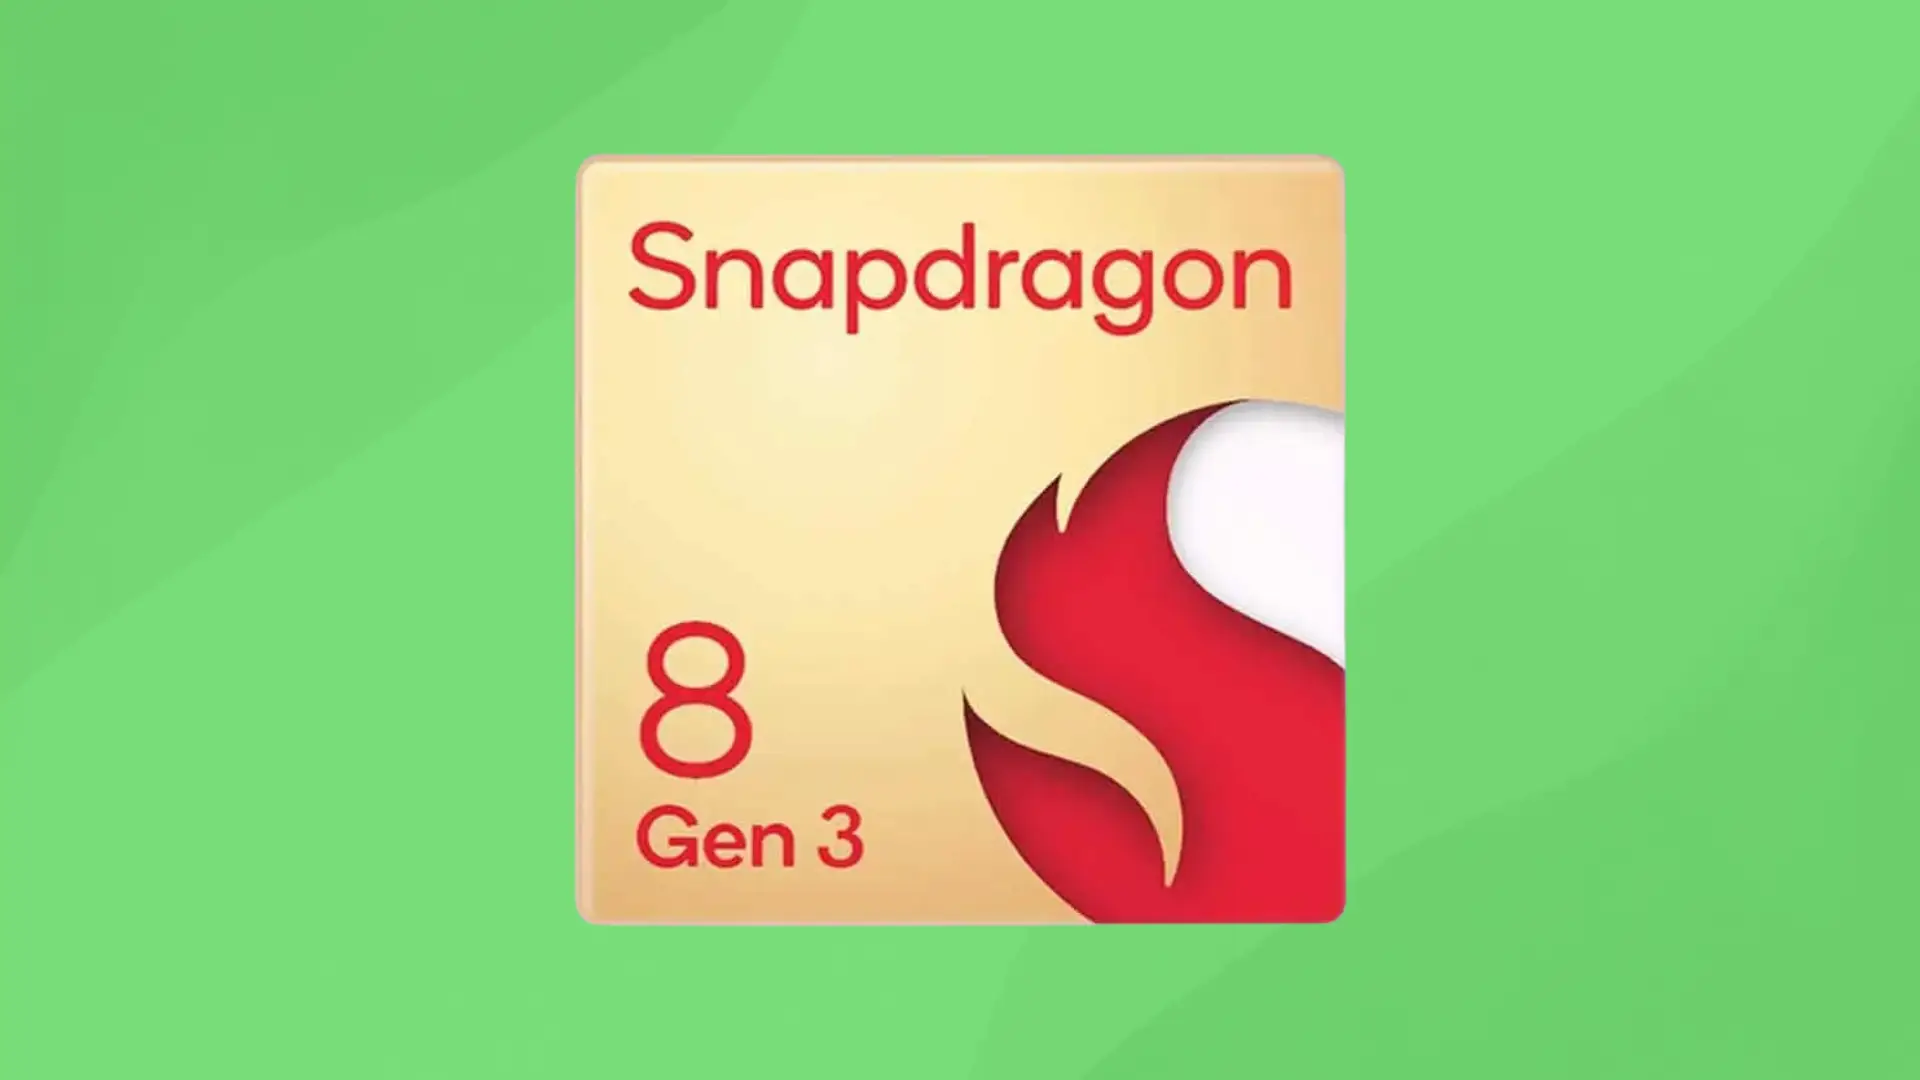 Qualcomm Snapdragon 8 Gen 3 with AI and better Ray Tracing is now official